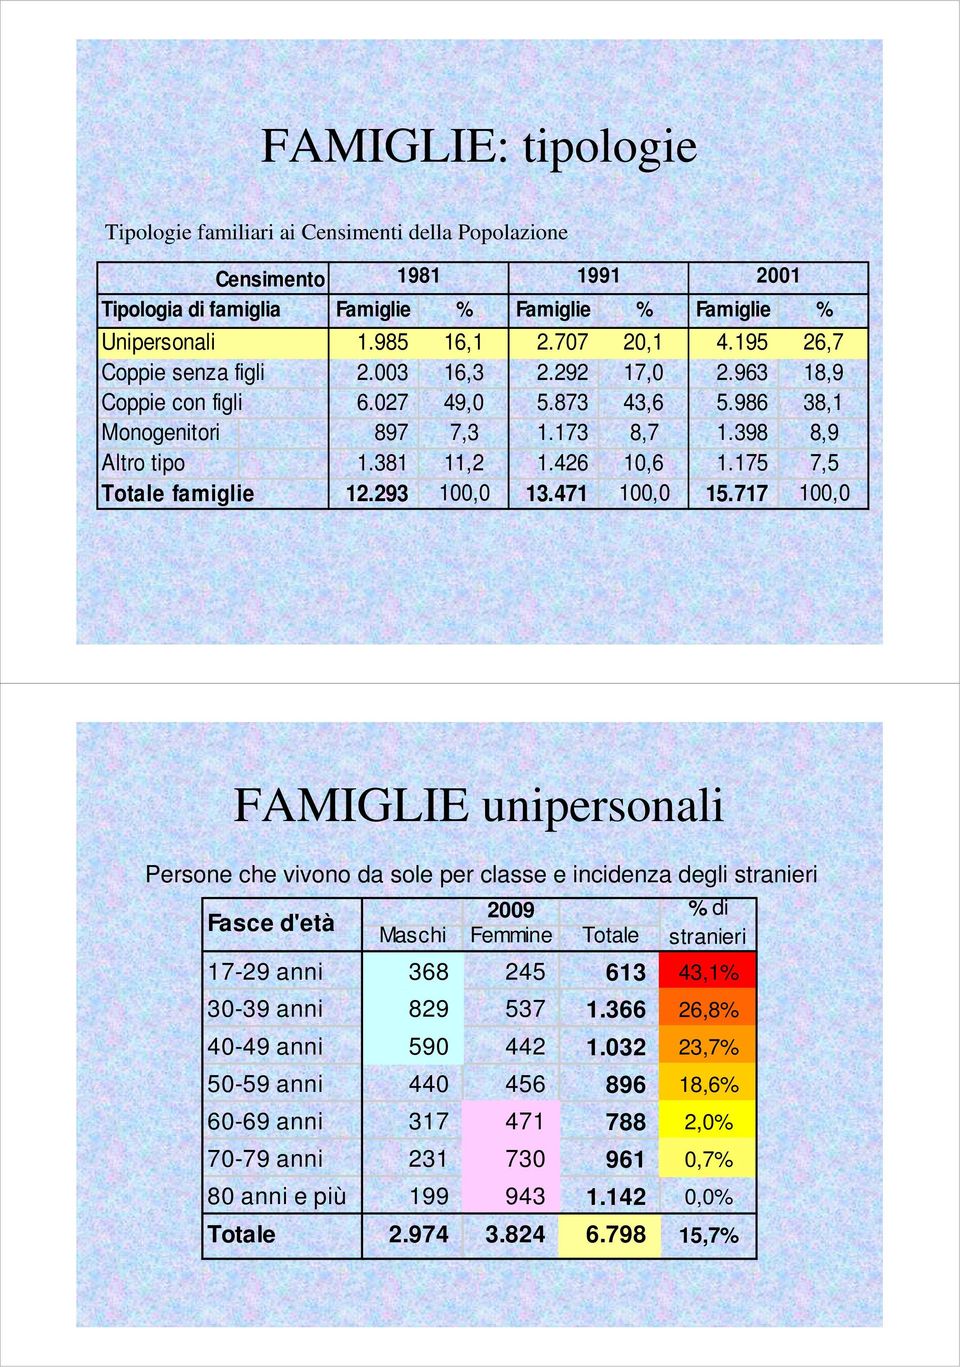 175 7,5 Totale famiglie 12.293 1, 13.471 1, 15.